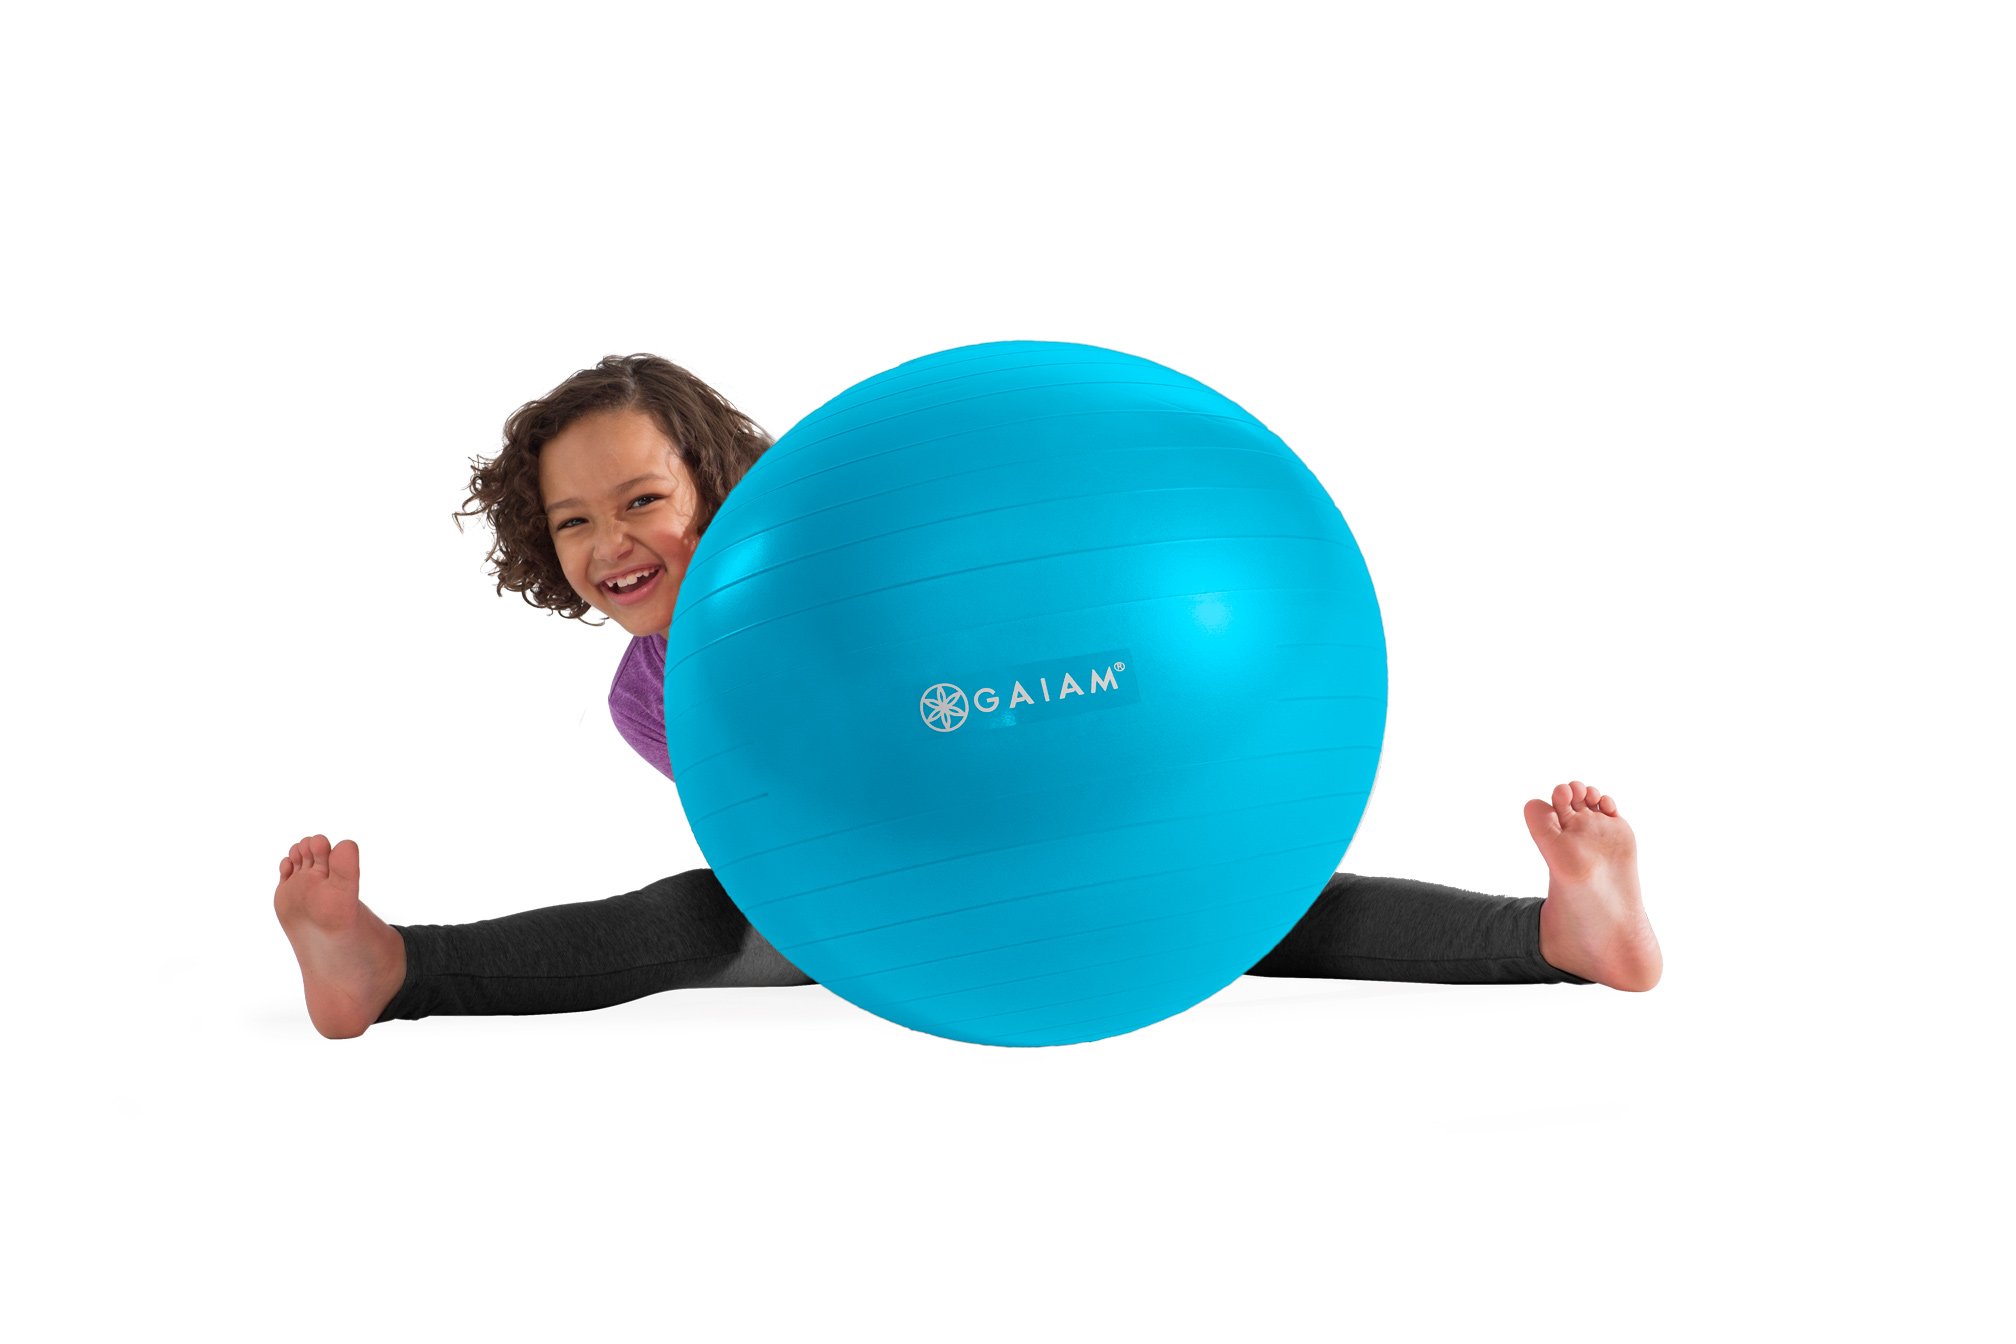 Gaiam Kids Balance Ball - Exercise Stability Yoga Ball, Kids Alternative Flexible Seating for Active Children in Home or Classroom (Satisfaction Guarantee), 45cm